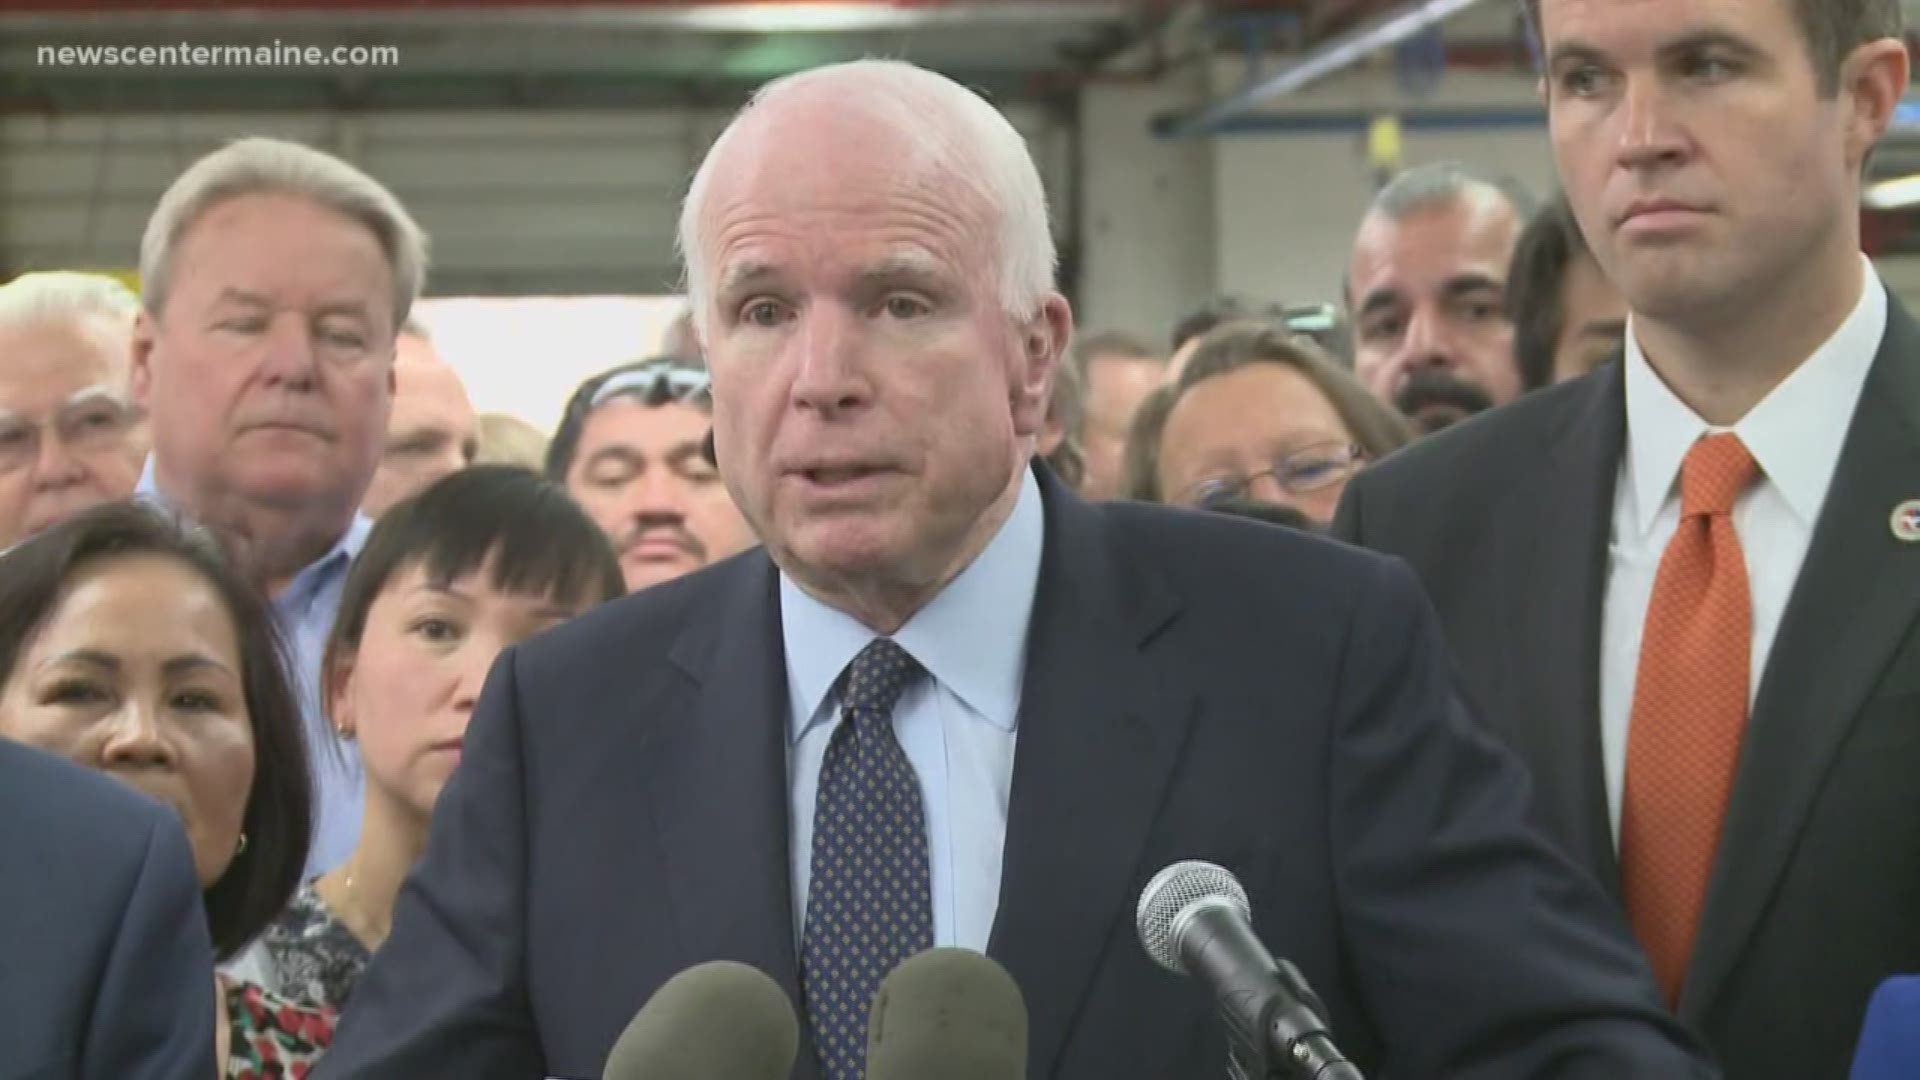 Political Brew crew weigh-in on President Donald Trump's renewed public criticism of the late Sen. John McCain